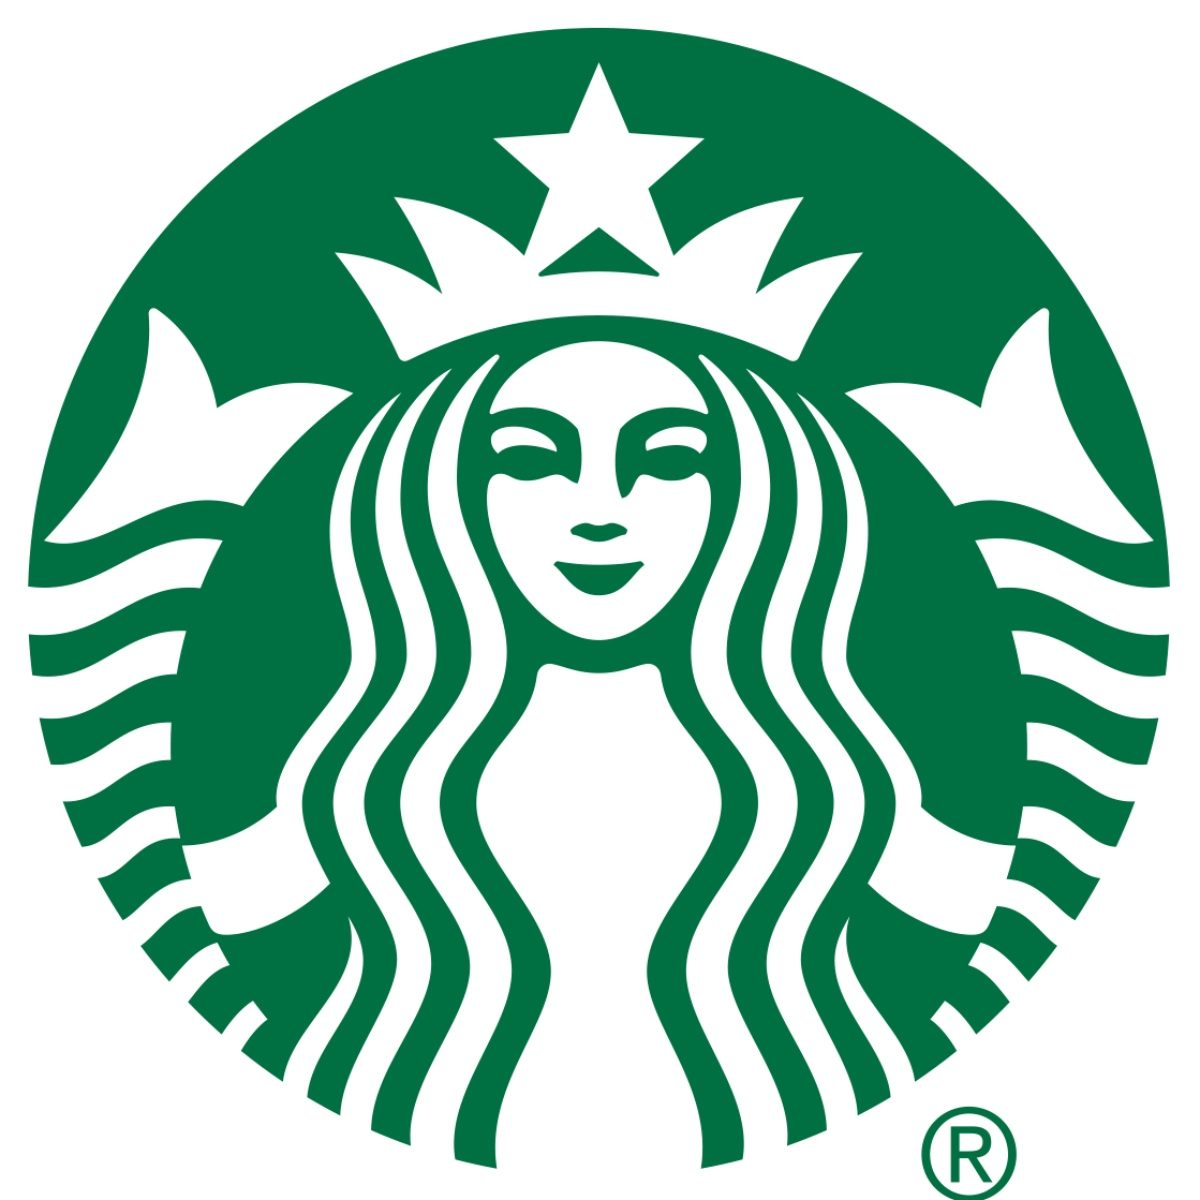 <p><strong><a class="SWhtmlLink" href="https://www.starbucks.com" rel="noopener">Starbucks</a>, Seattle</strong></p> <p>This now-international coffee brand was originally a small location that sold small-batch roasted coffee beans out of Pike Place Market. It wasn't even started by businesspeople—the original founders were writers and teachers. Now, they're so famous that we were able to create <a class="SWhtmlLink" href="https://www.tasteofhome.com/collection/starbucks-copycat-recipes/" rel="noopener">over 20 copycat recipes</a>.</p>